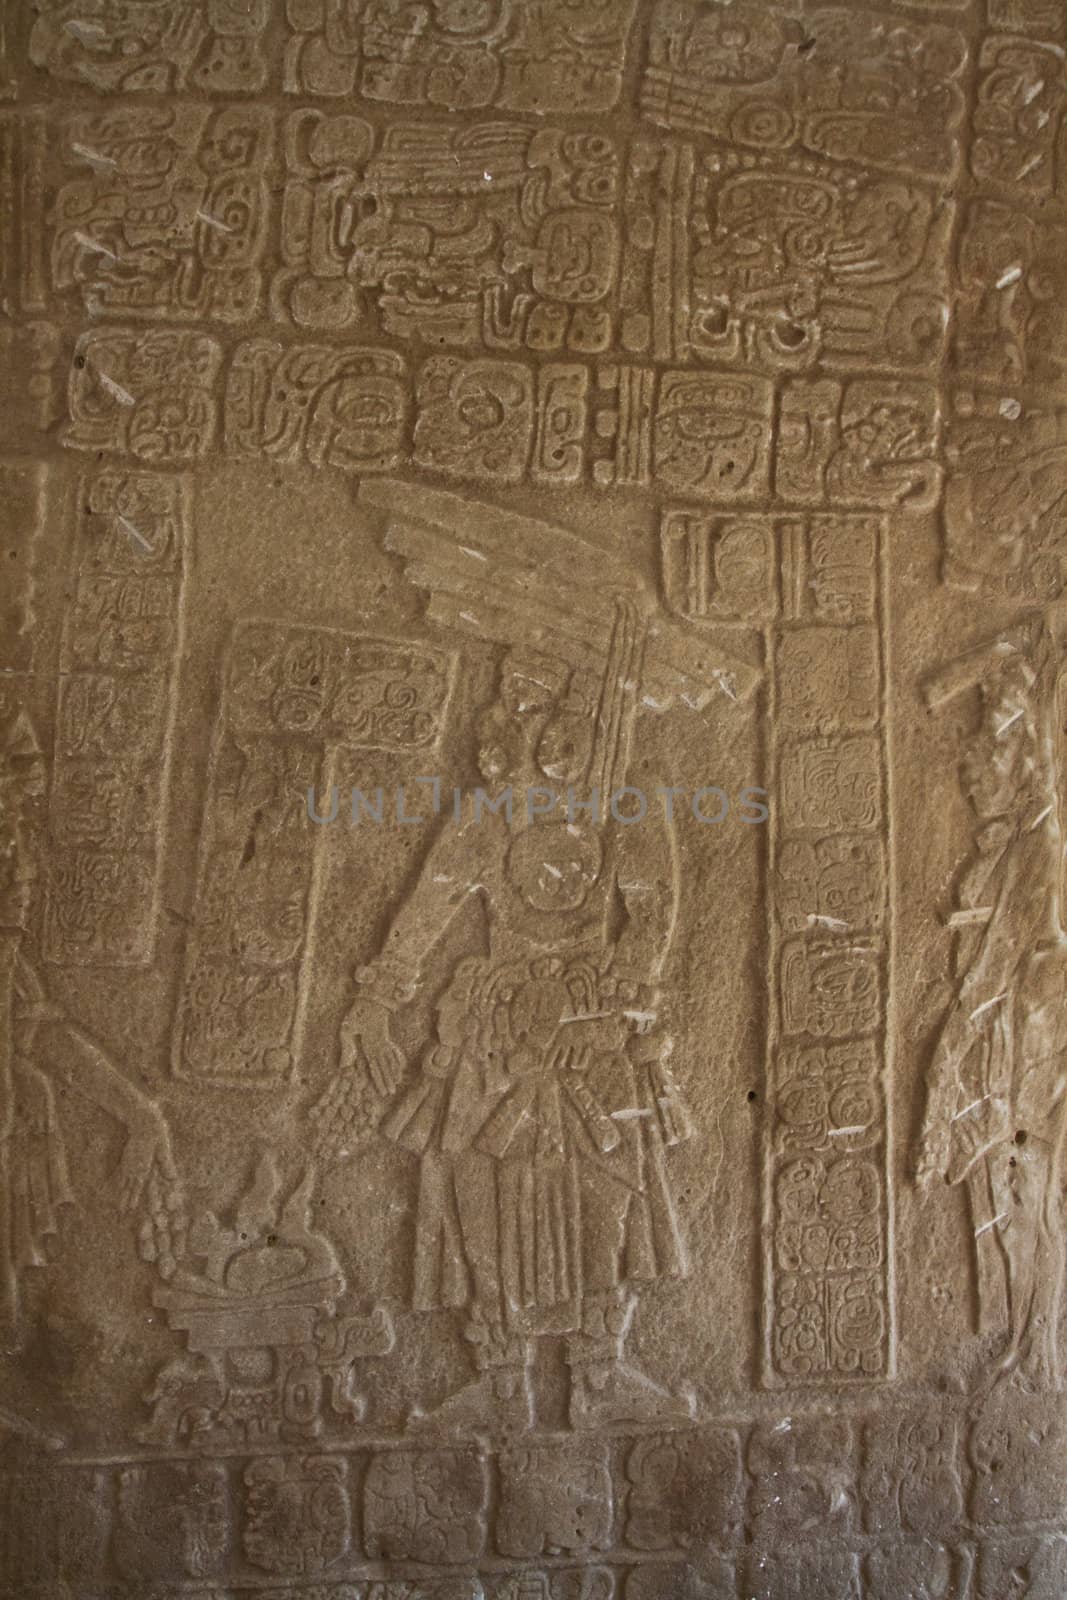 Ancient Mayan stone relief carving in Belieze.